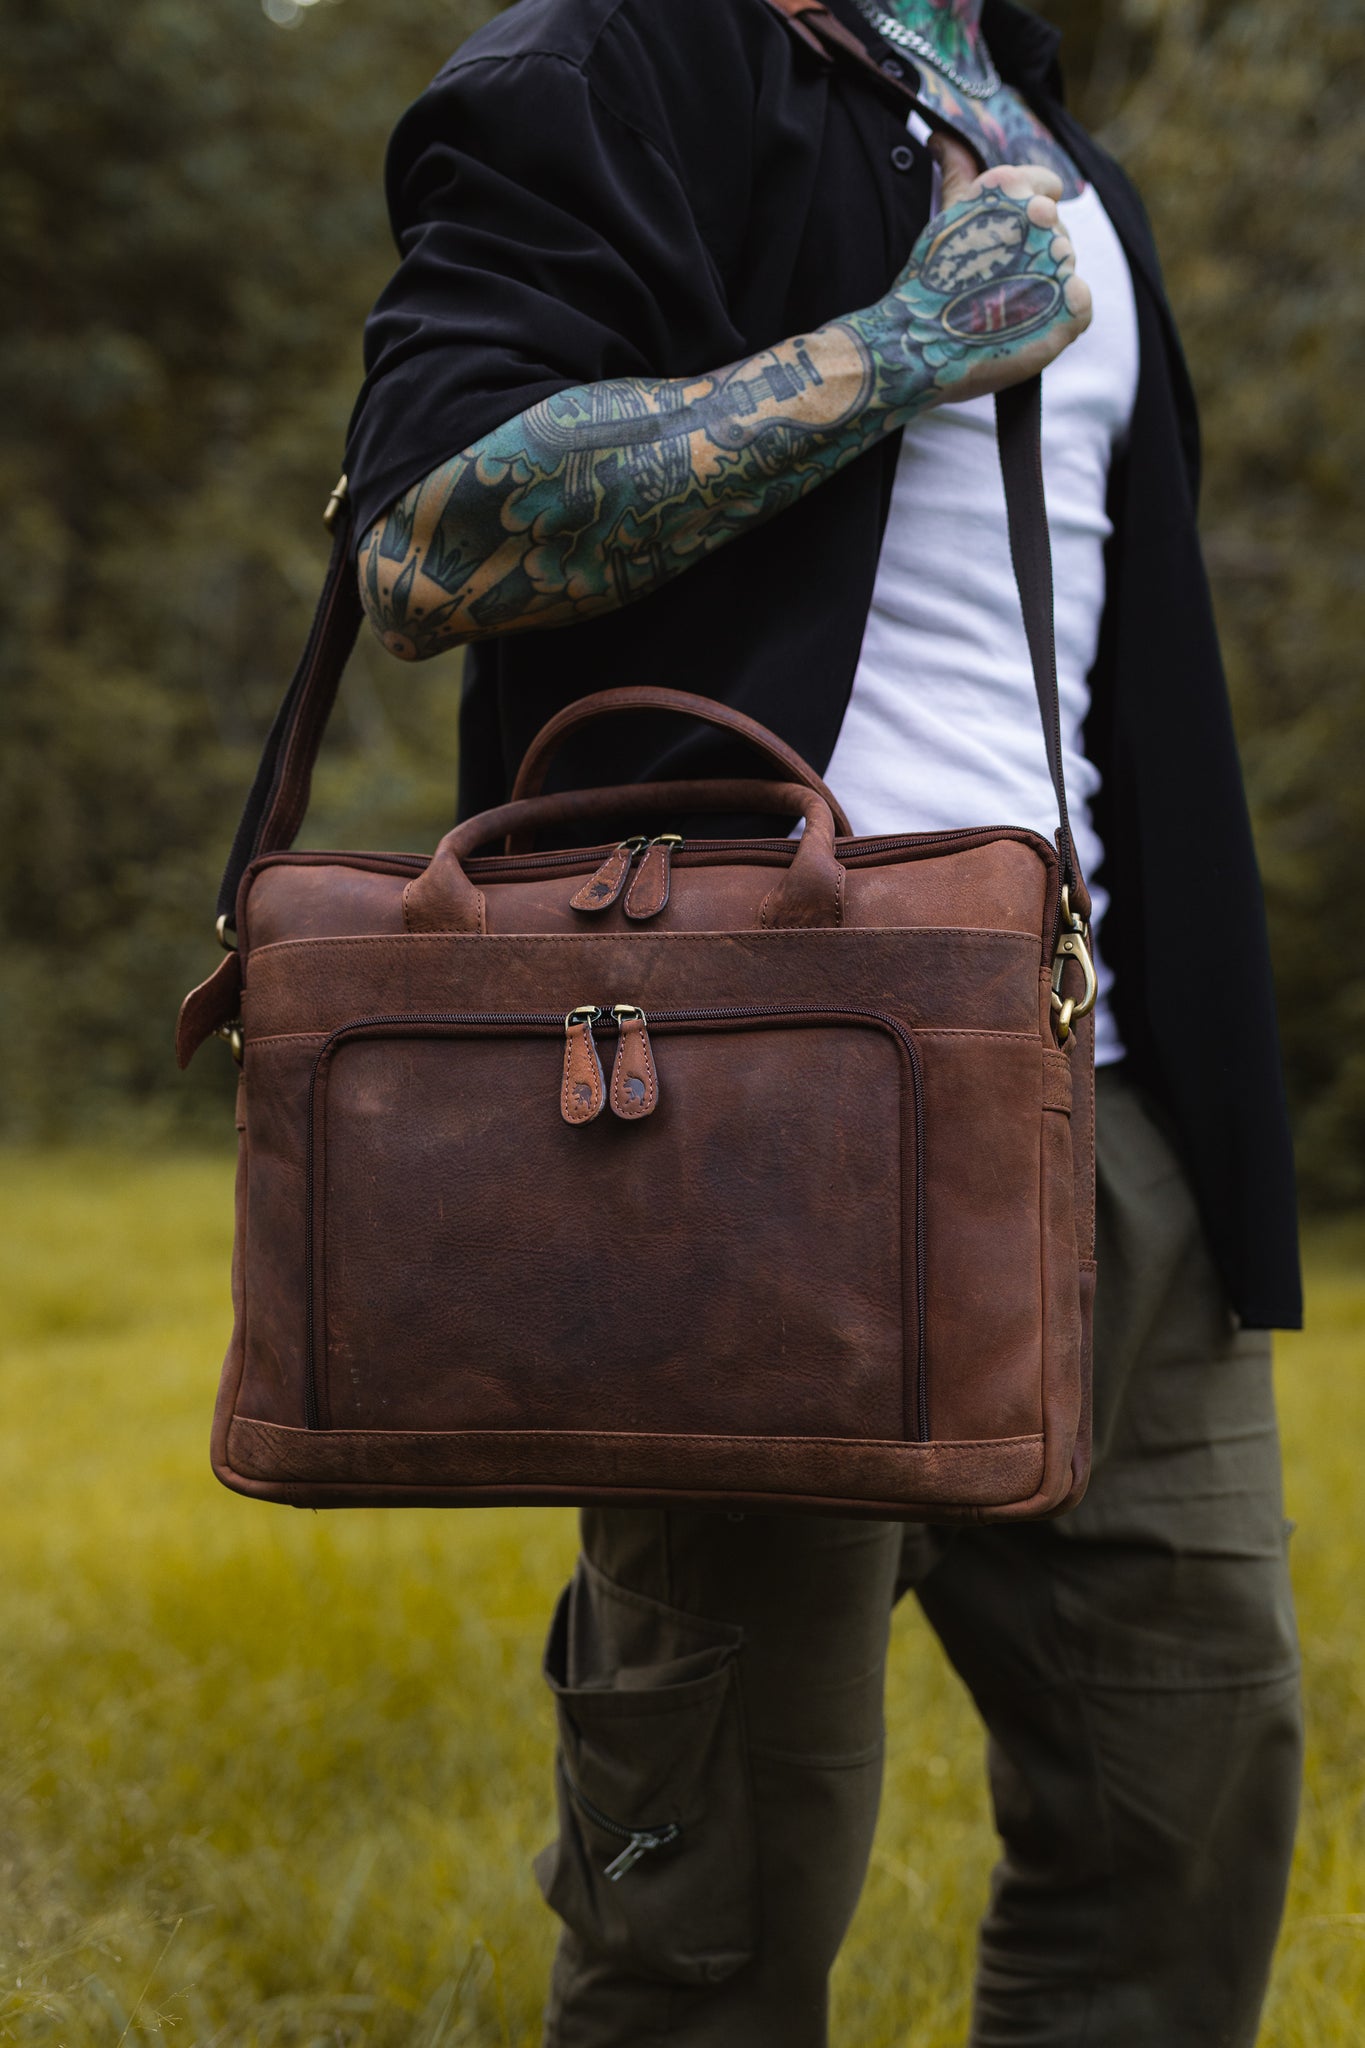 Tips for Organising Your Documents in a Stylish Leather Laptop Document Bag